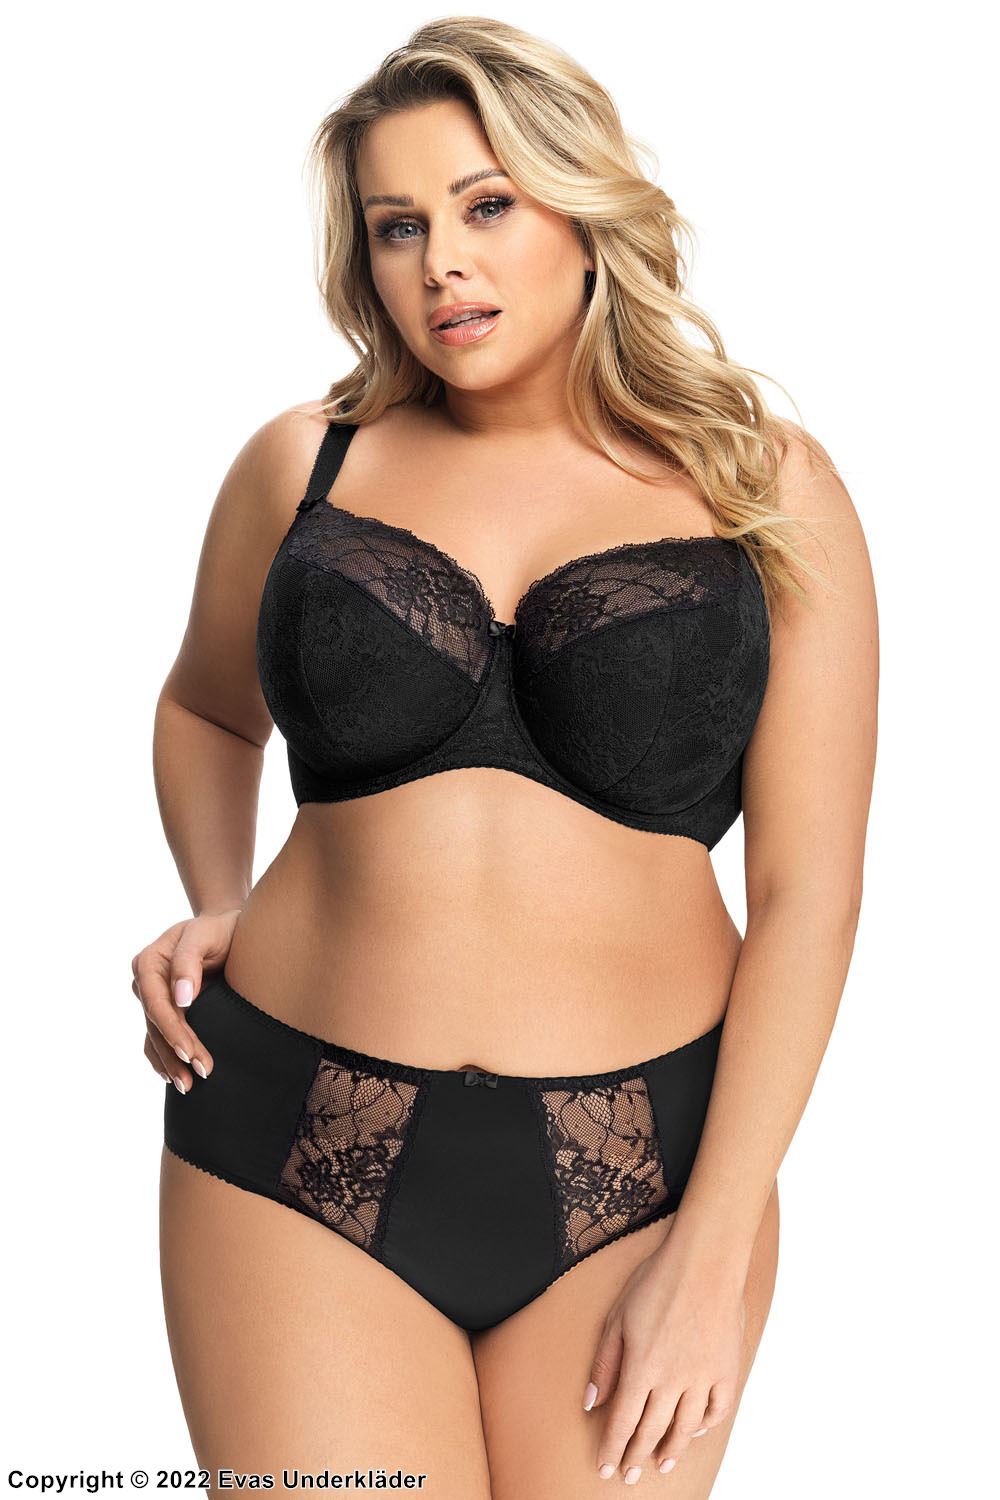 Romantic bra, lace overlay, B to J-cup